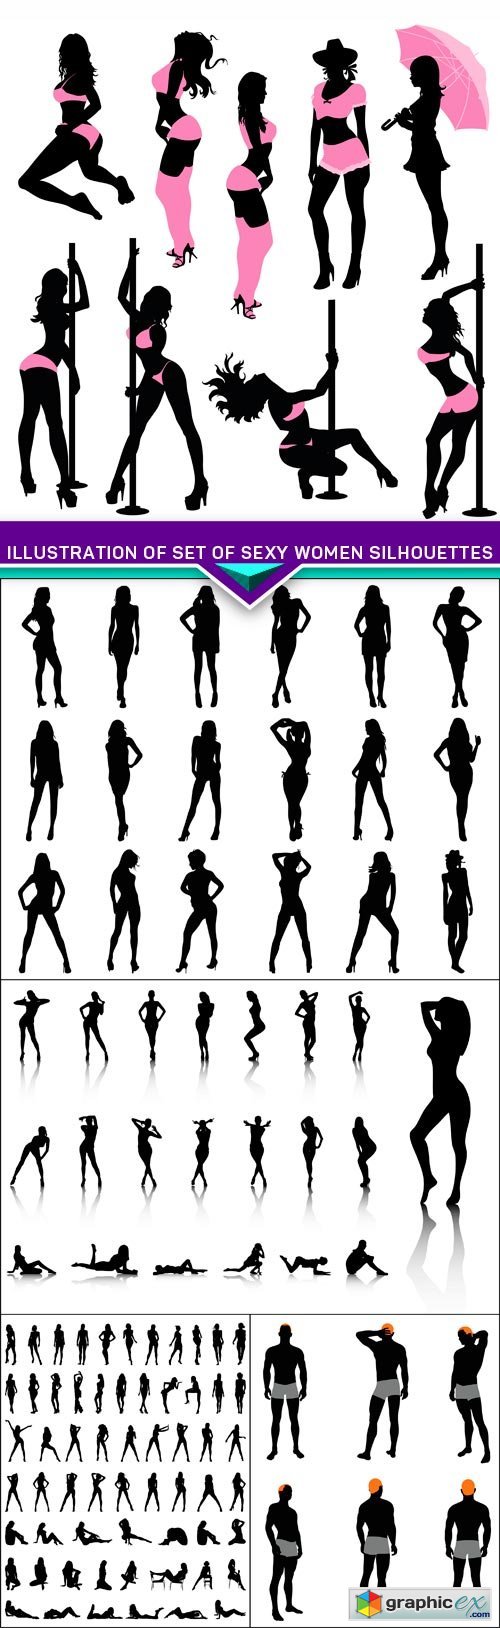 Illustration of Set of sexy women silhouettes 5X EPS